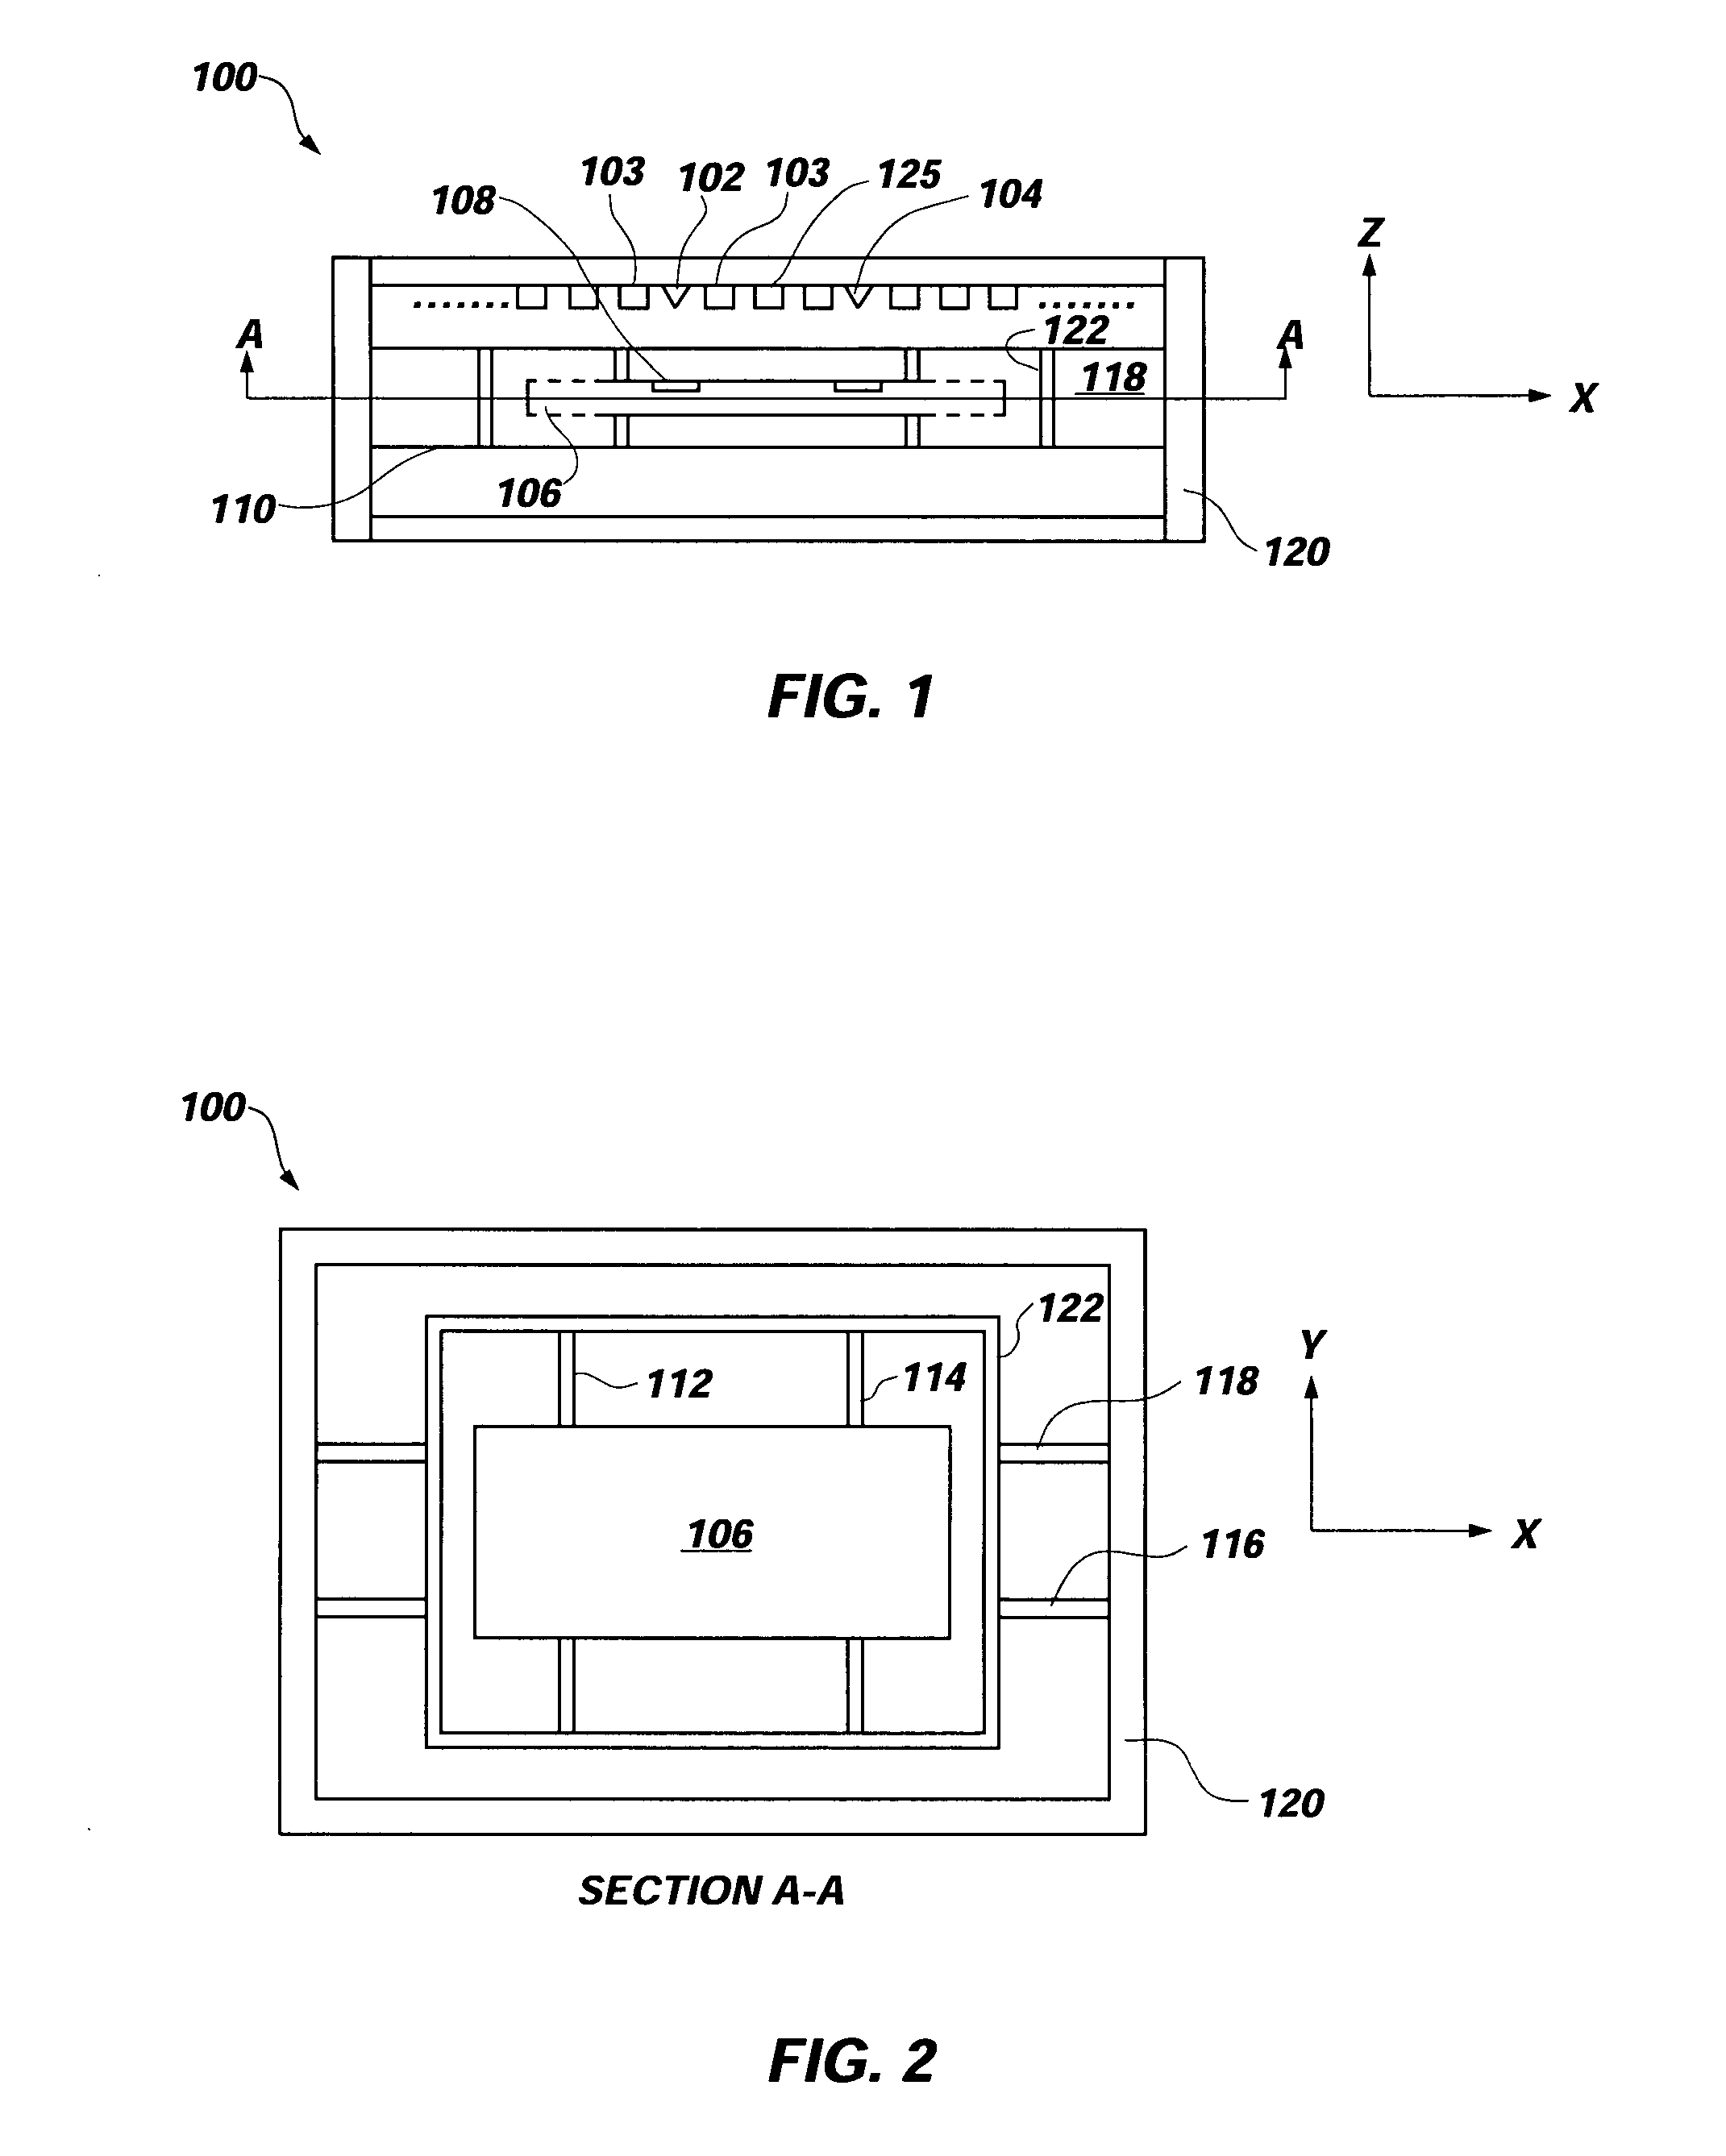 Ultra-high density storage device using phase change diode memory cells and methods of fabrication thereof